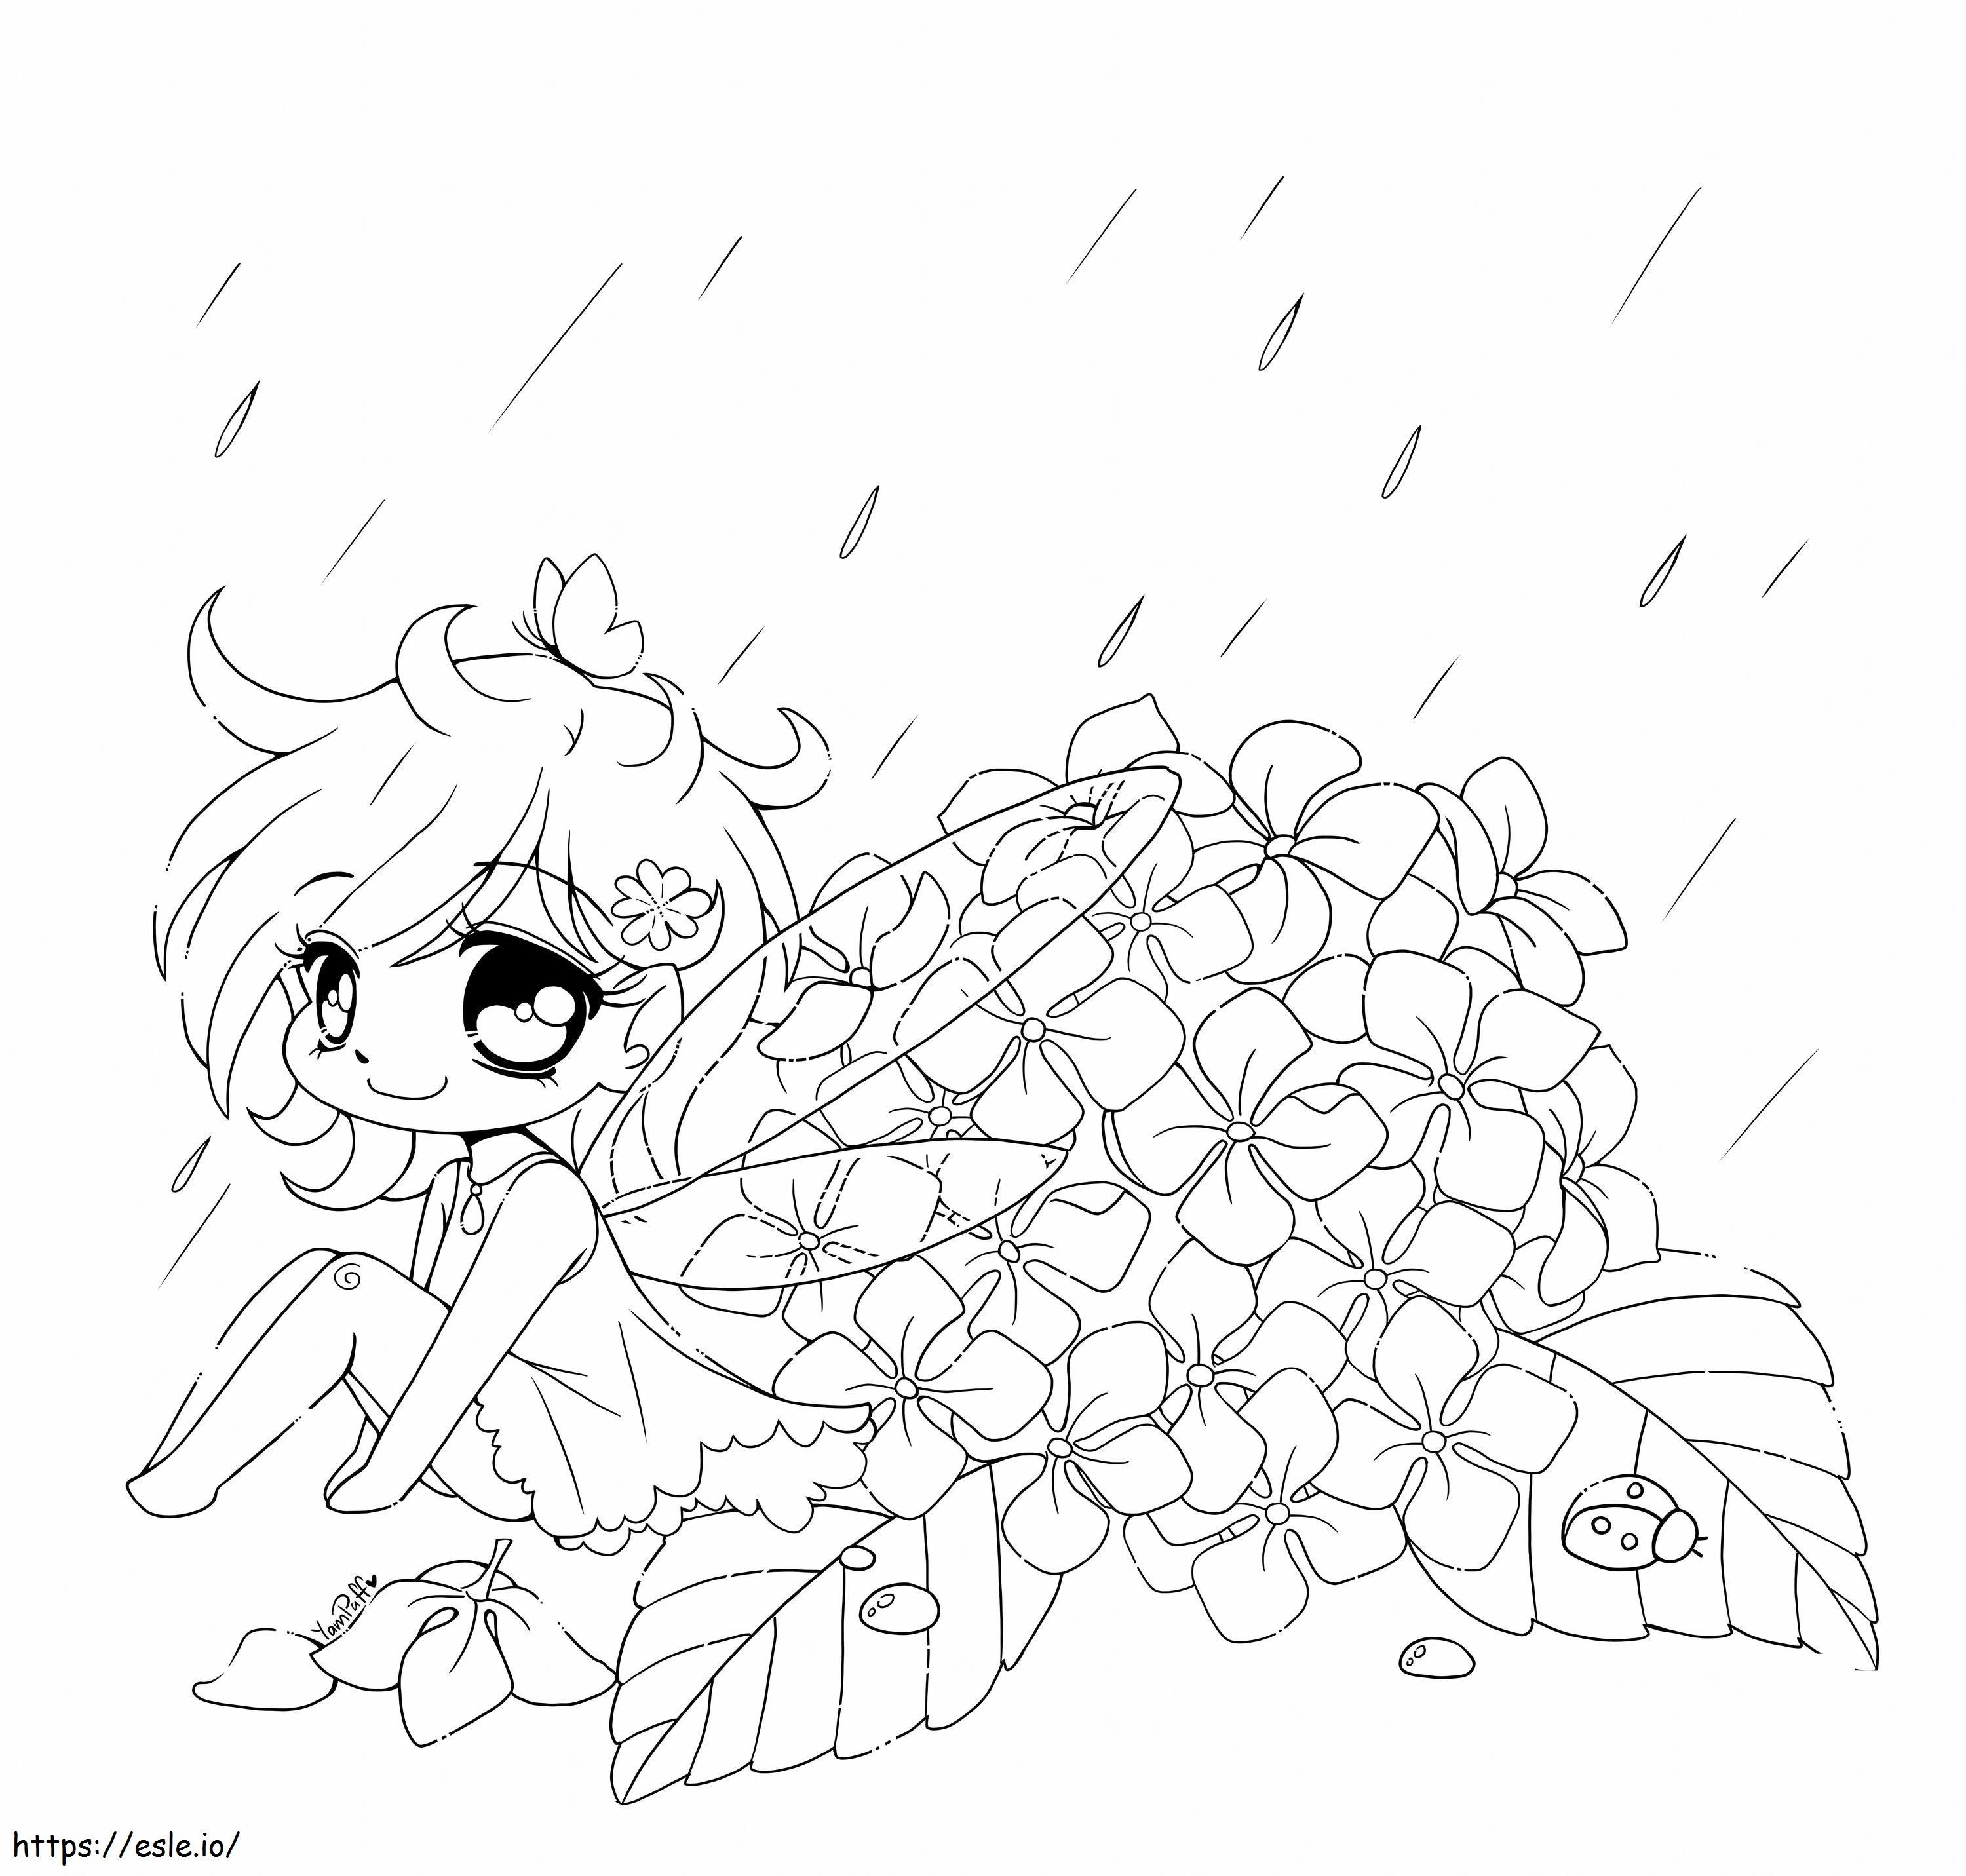 Kawaii Fairy In The Rain coloring page